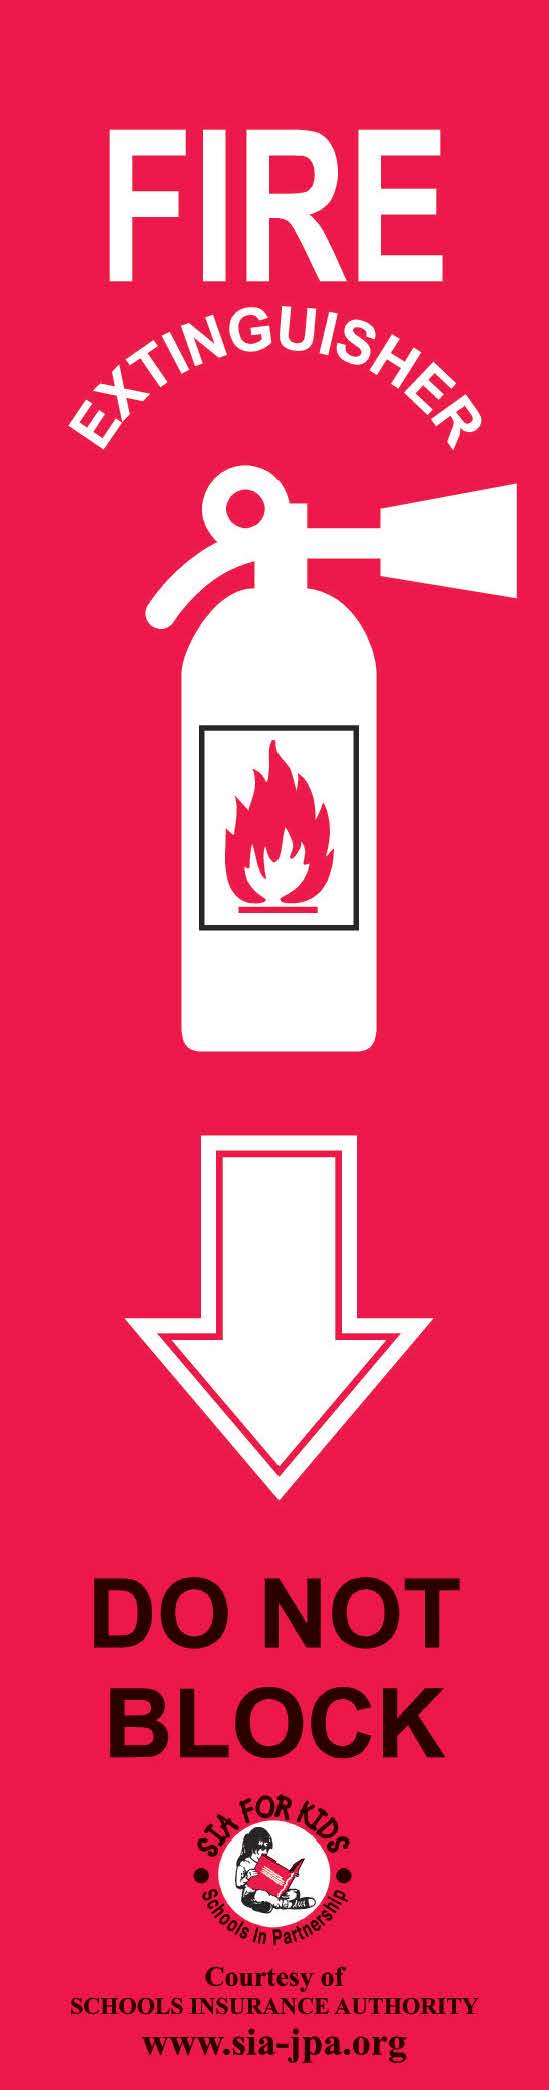 Fire Extinguisher text with downward pointing arrow graphic. Do Not Block. SIA for Kids logo - Courtesy of Schools Insurance Authority.